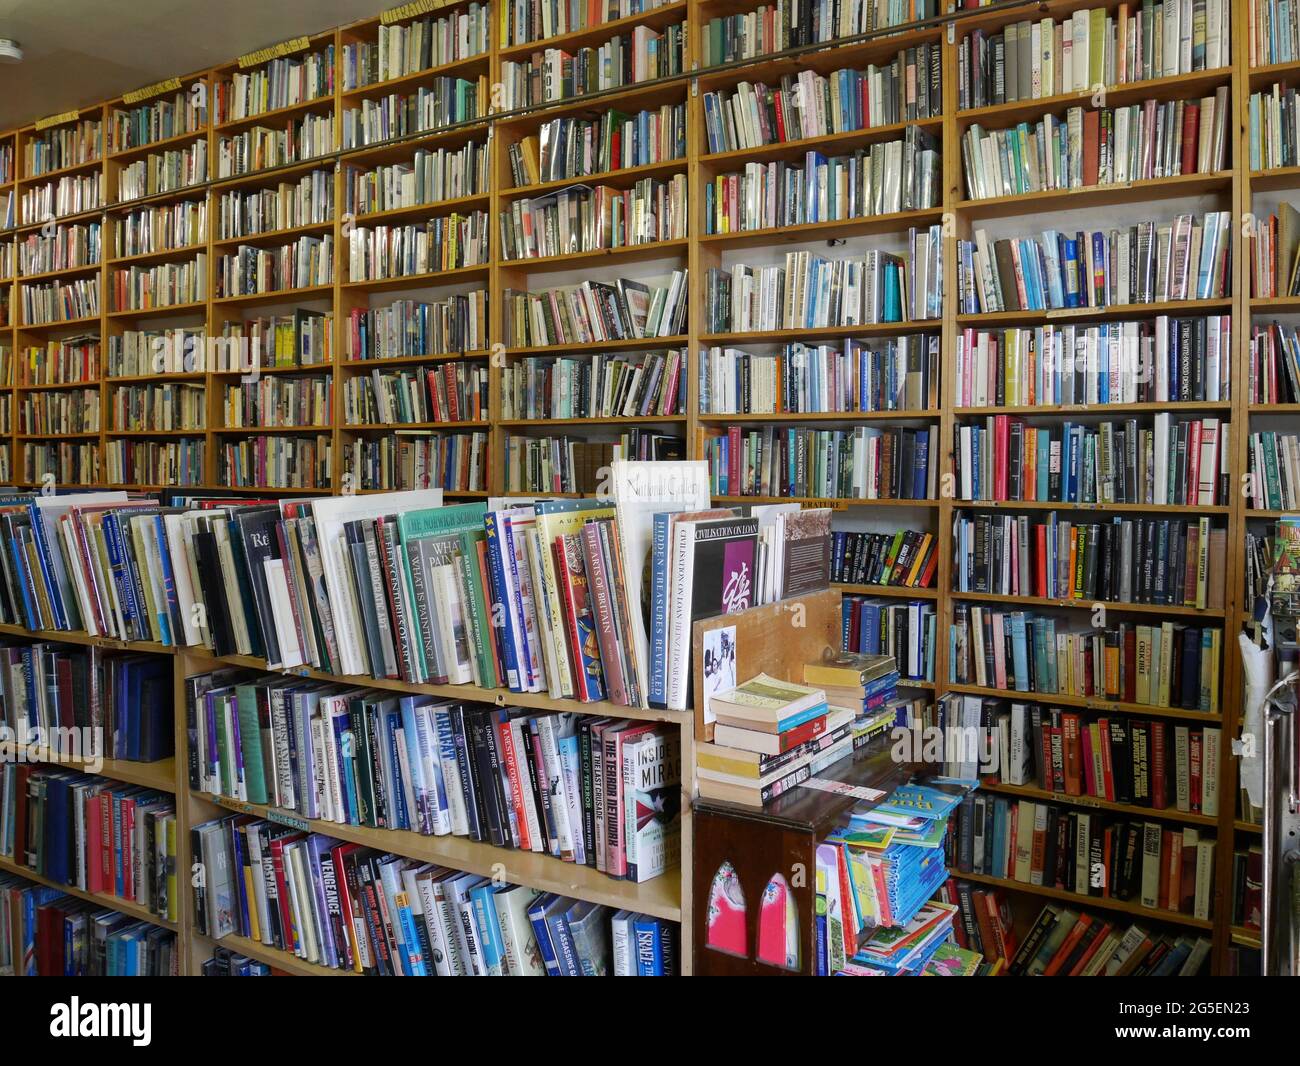 interior of vintage book store Stock Photo